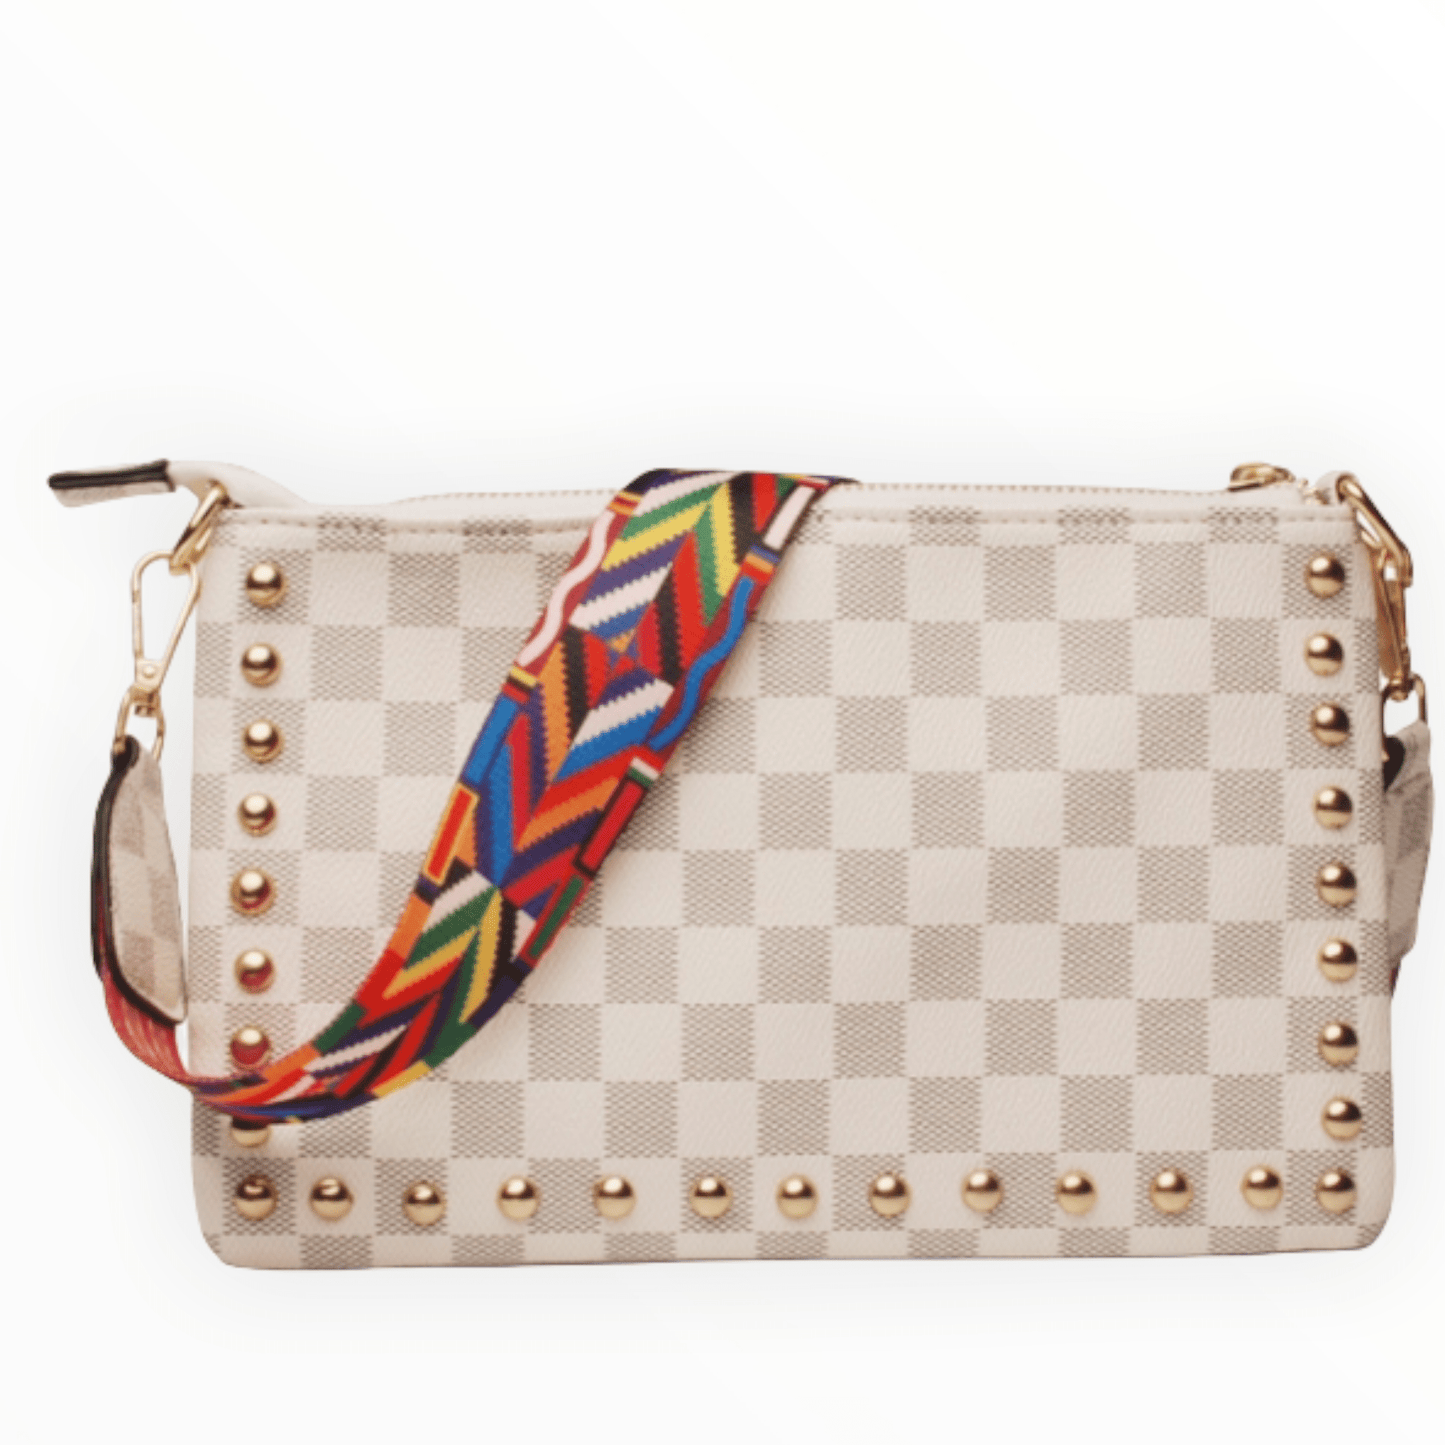 Checkered funky strap bag in beige/white and Brown available